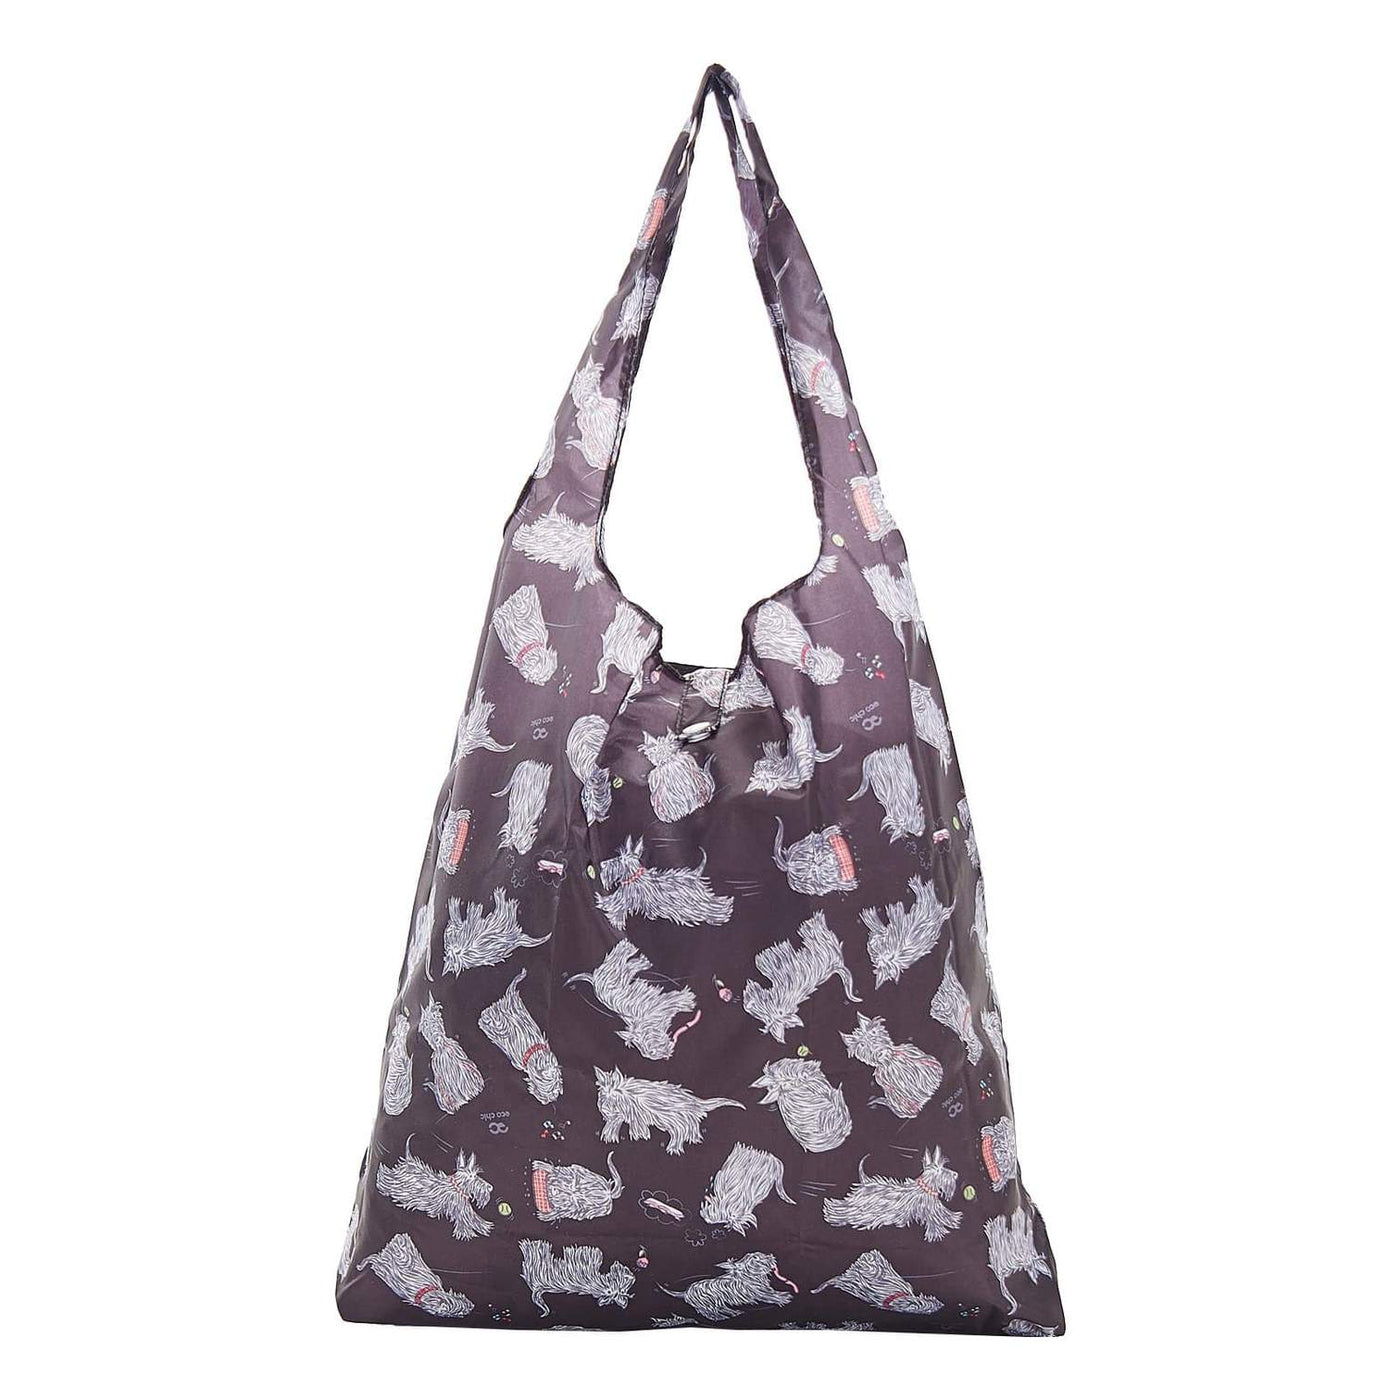 Eco Chic Foldable Recycled Shopping Bag -Scatty Dog -Black